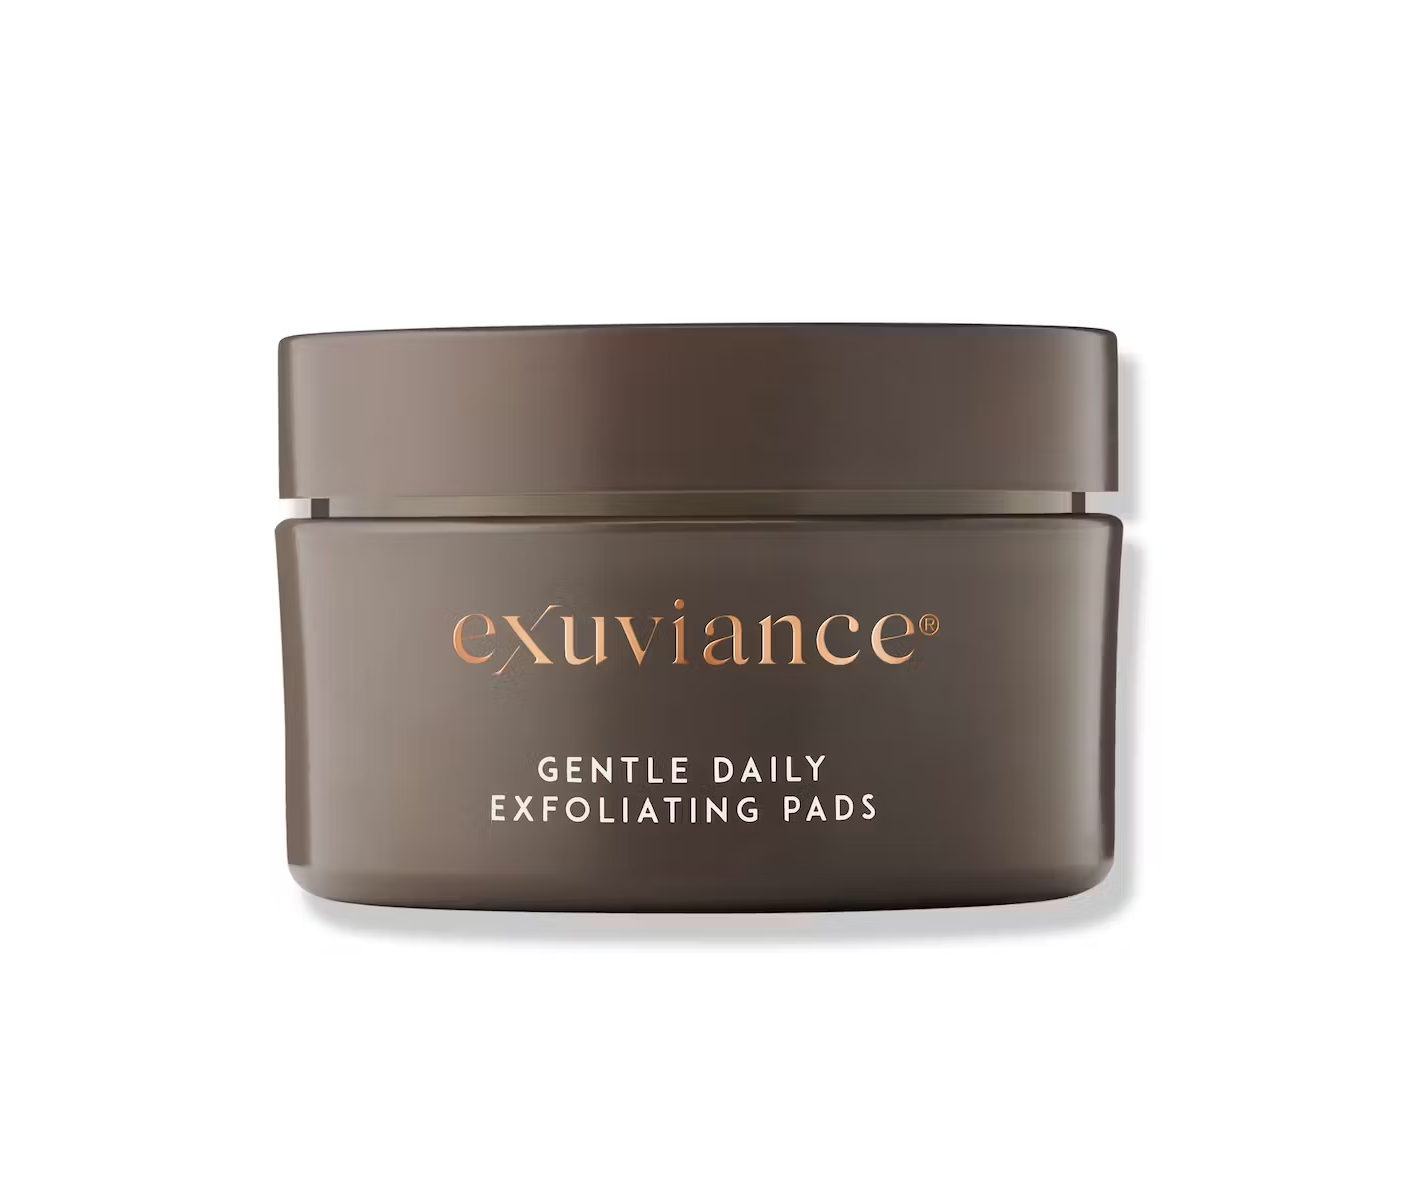 Se Exuviance Gentle Daily Exfoliating Pads hos Staybeautiful